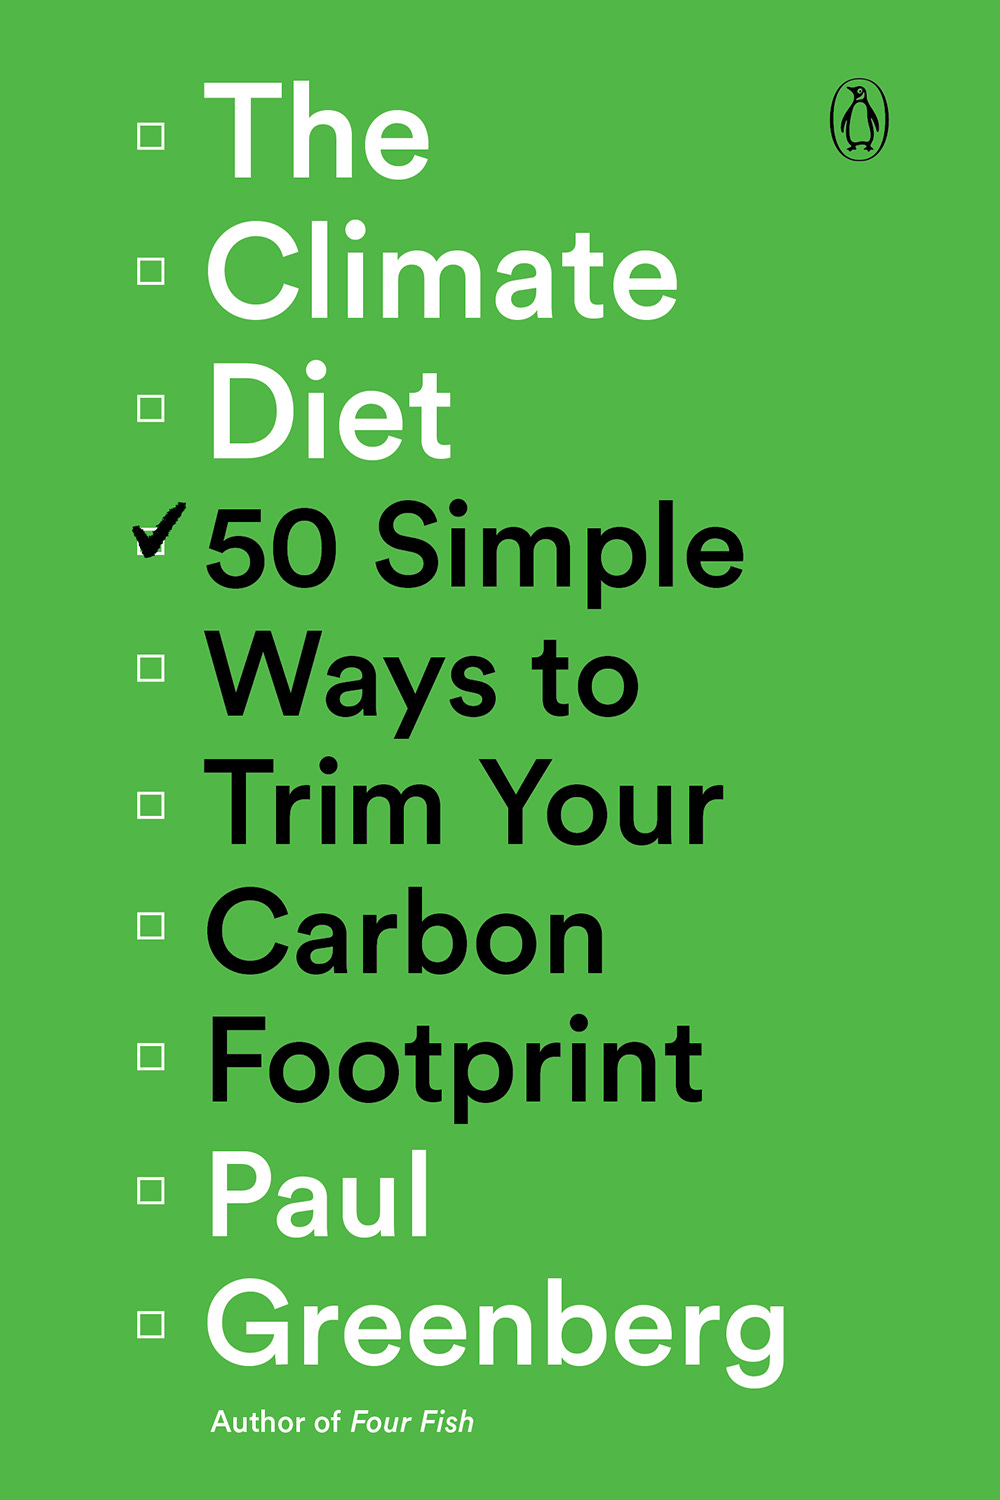 The Climate Diet book cover